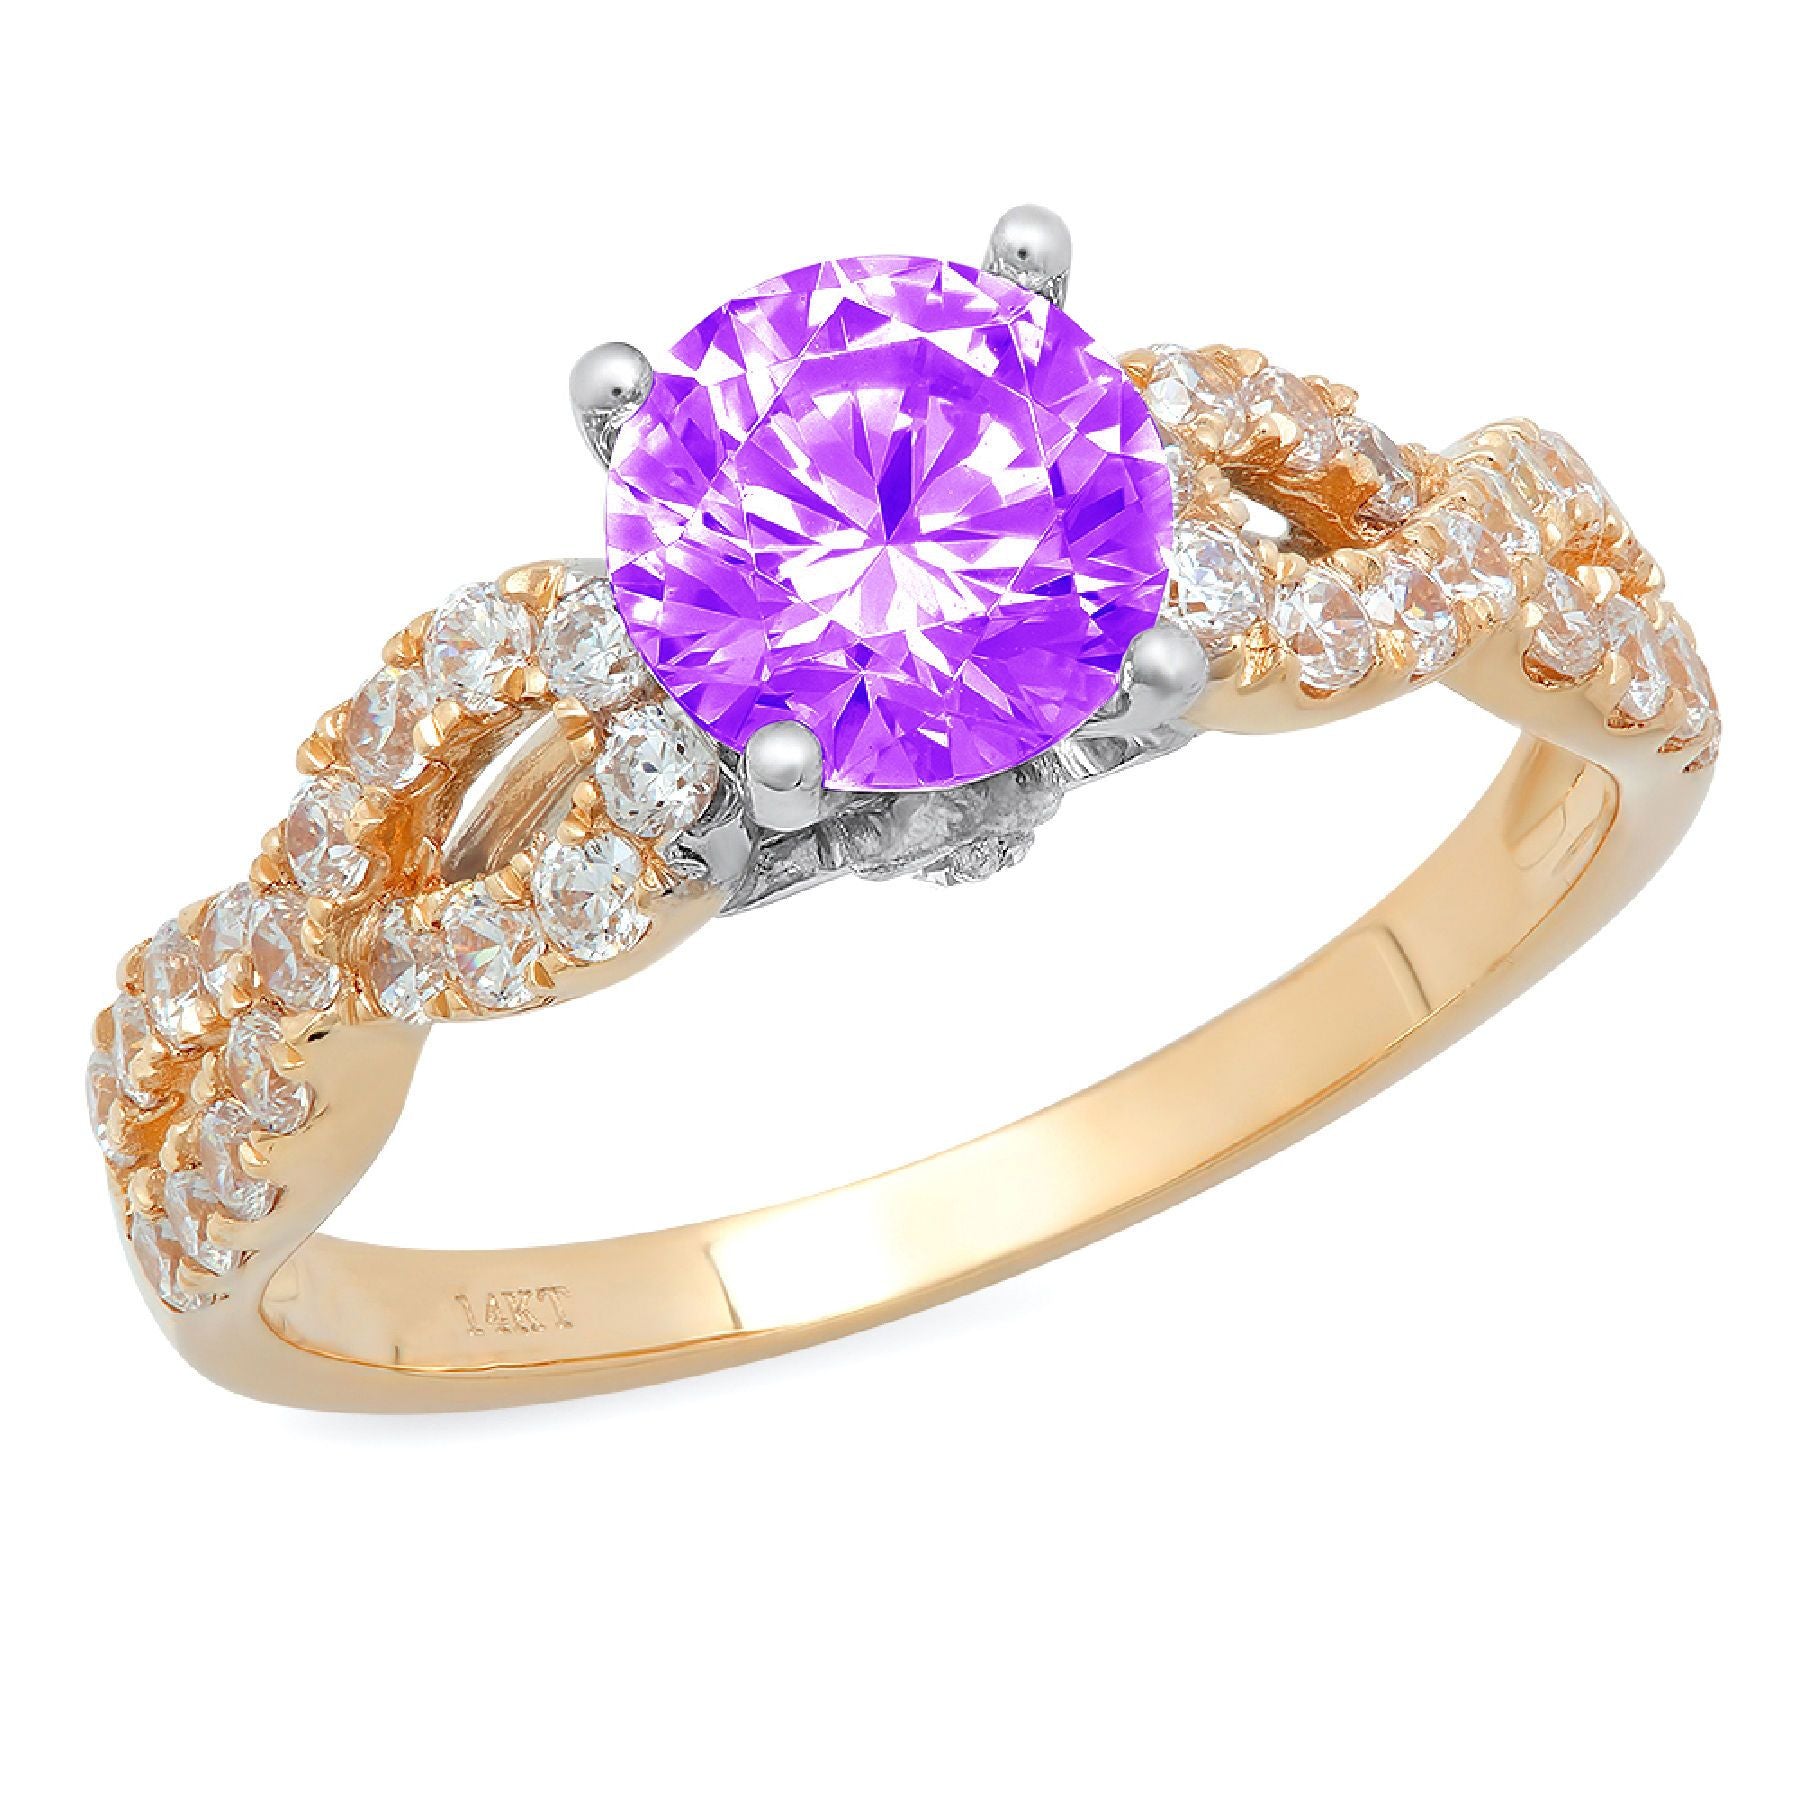 Buy Engagement Rings, Statement Rings, and Bridal Sets Online